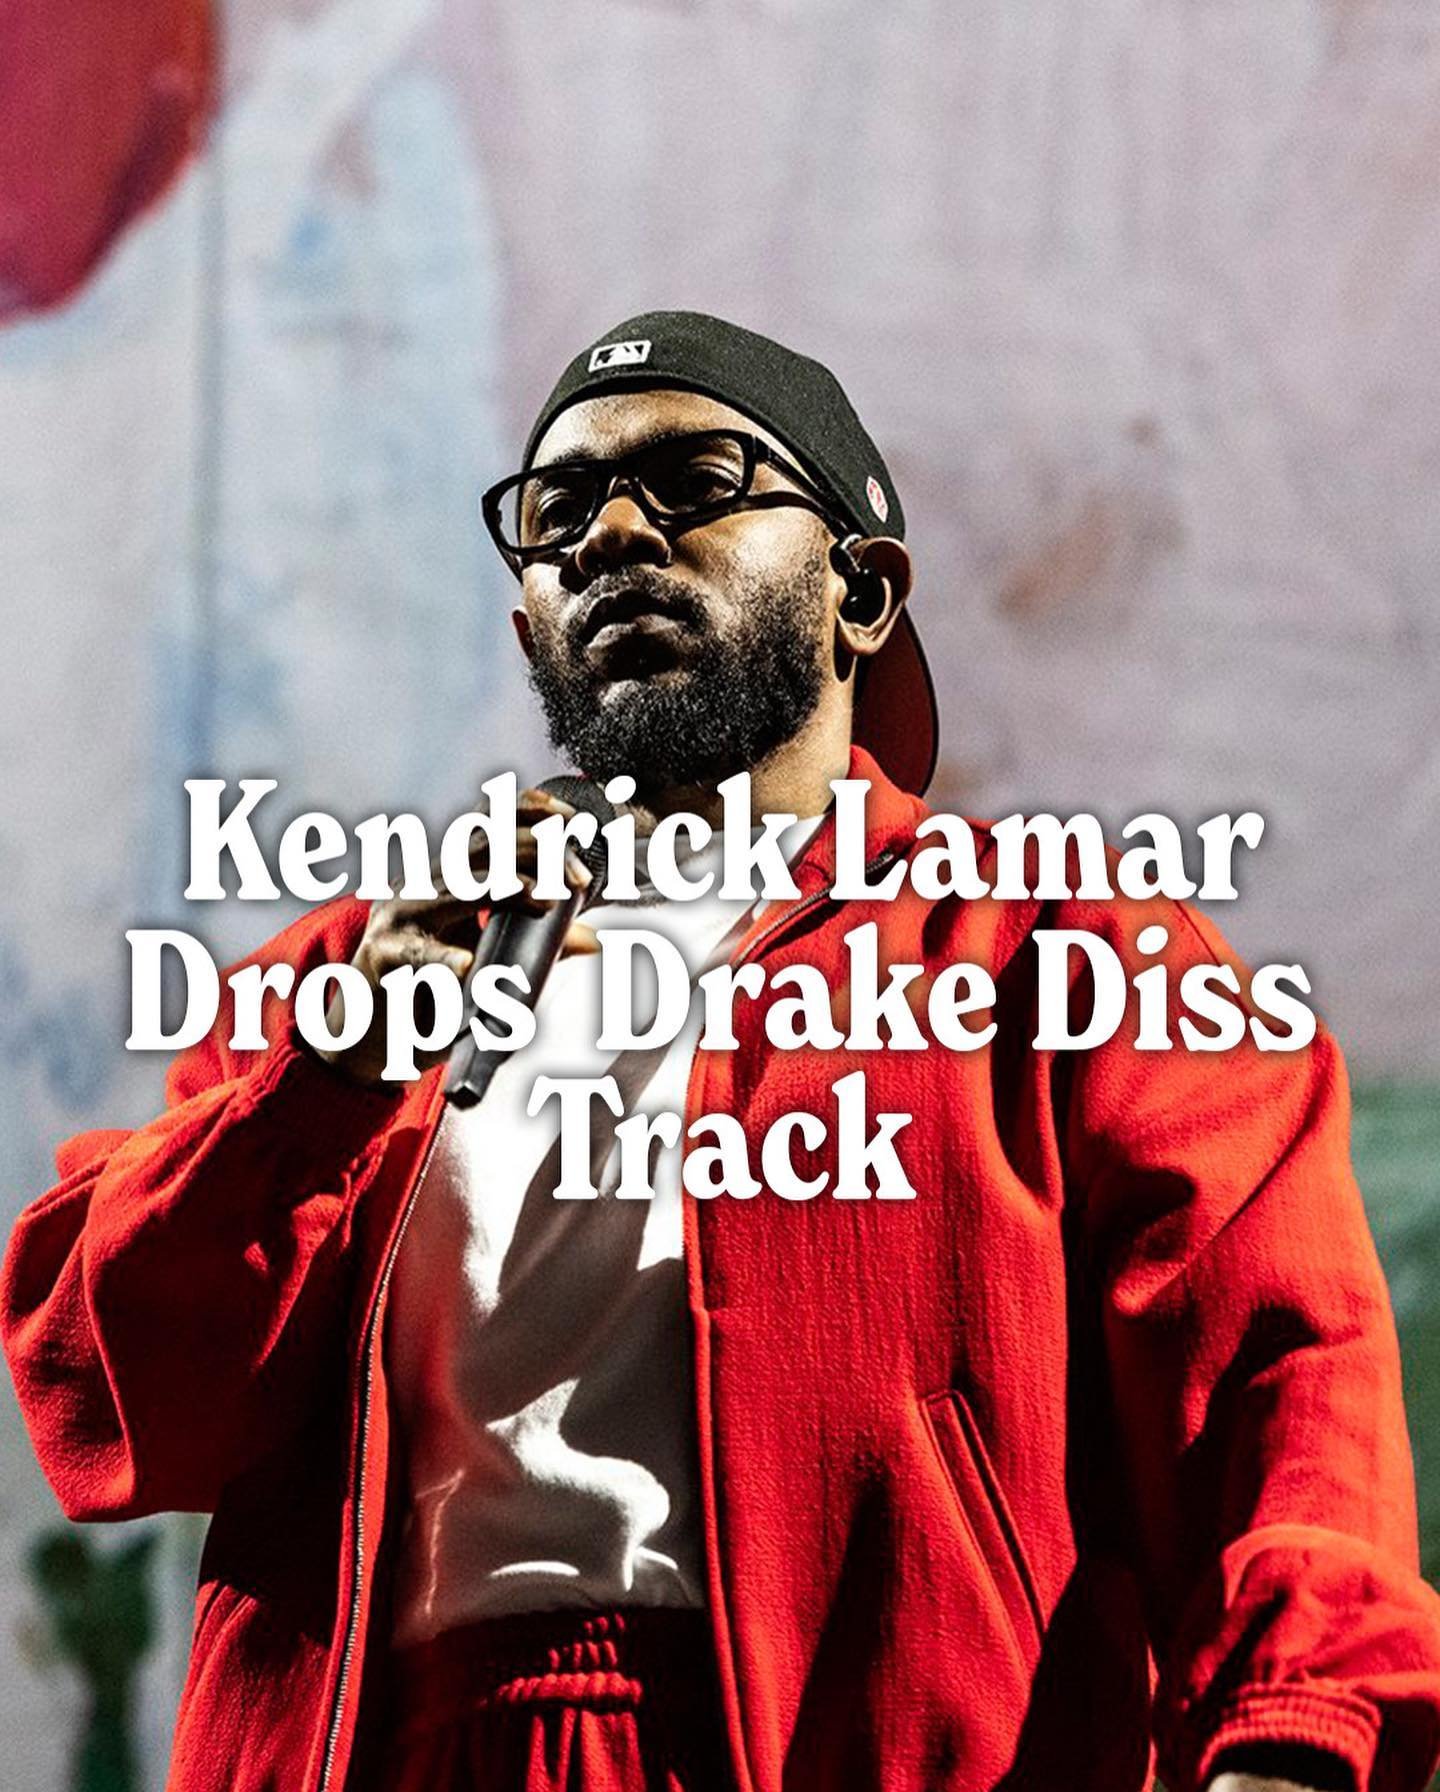 Kendrick Lamar takes aim at Drake in new 6-minute diss track &ldquo;euphoria&rdquo; 🧯

Listen to the new track at the link in our bio 🔗

#kendricklamar #drake #euphoria #stilllistening